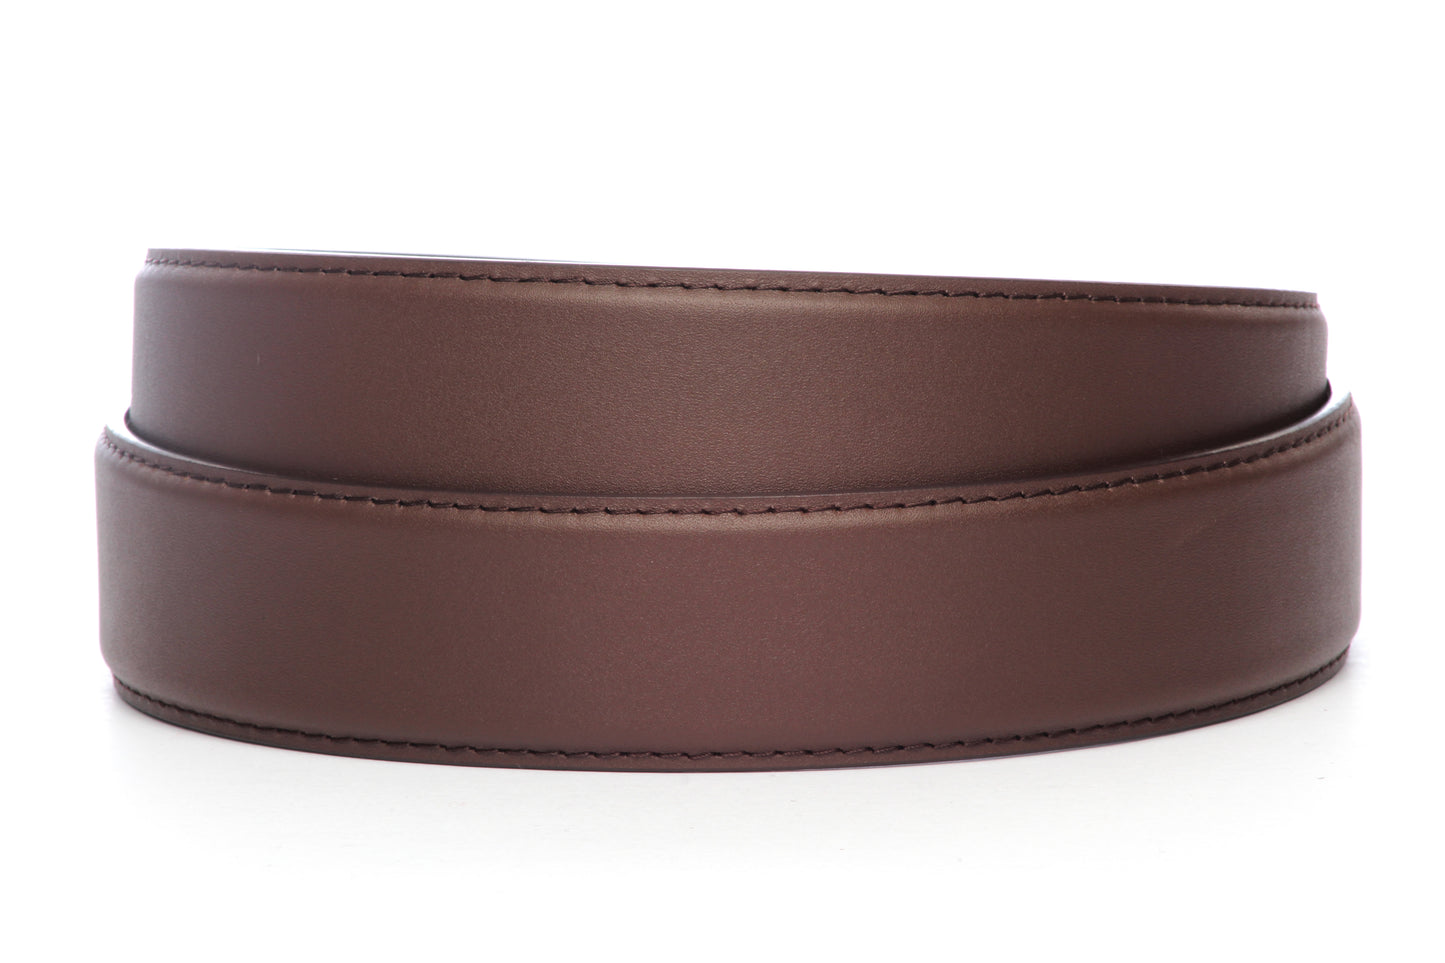 Men's leather belt strap in chocolate, 1.5 inches wide, formal look